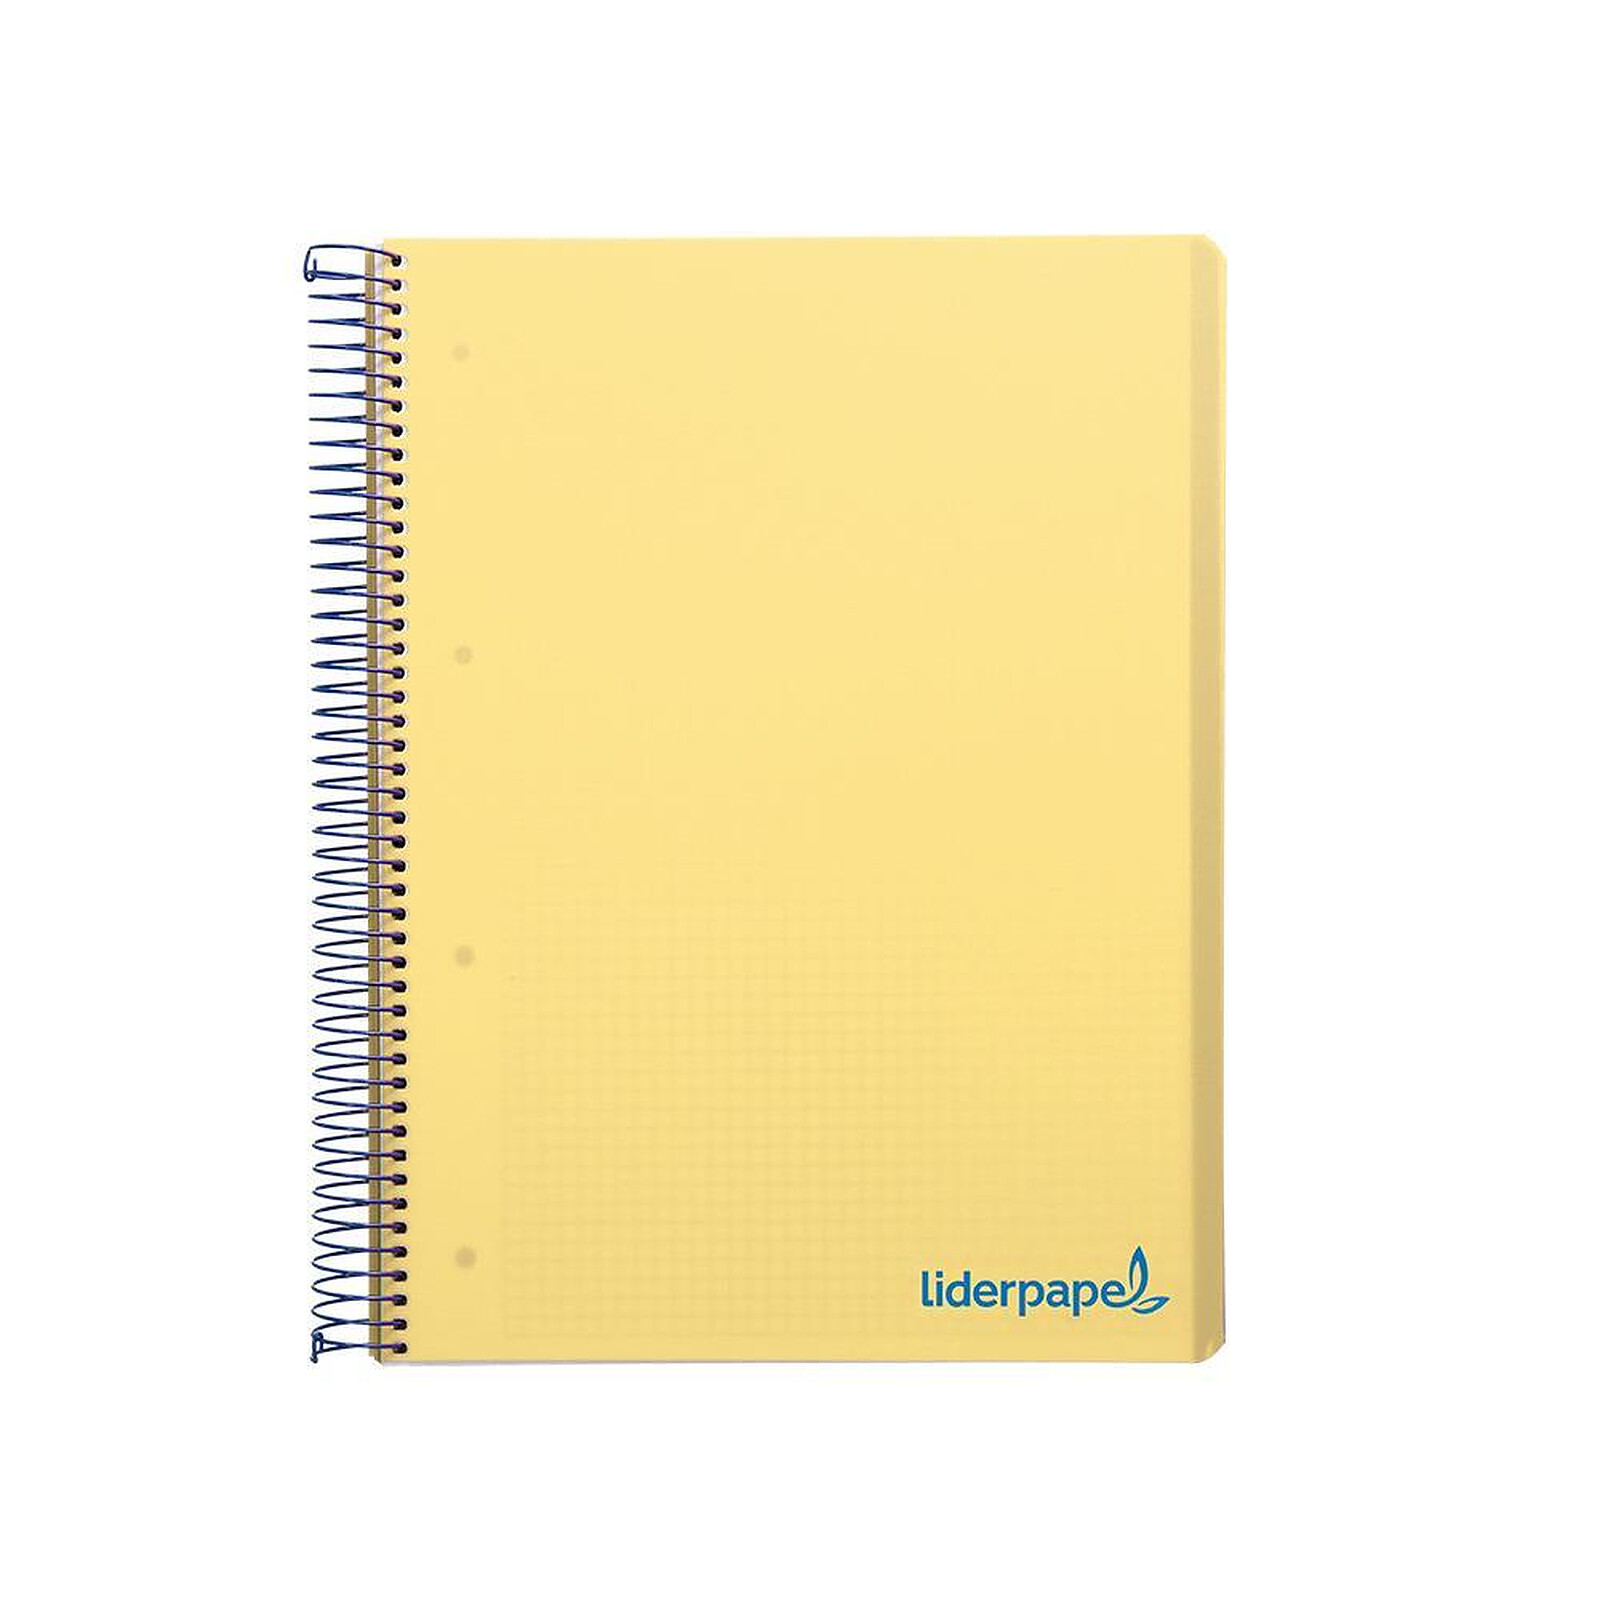 LIDERPAPEL Cahier spirale A4 micro wonder 240 pages 90g 4 trous 5 bandes -  Jaune x 24 - Cahier - LDLC